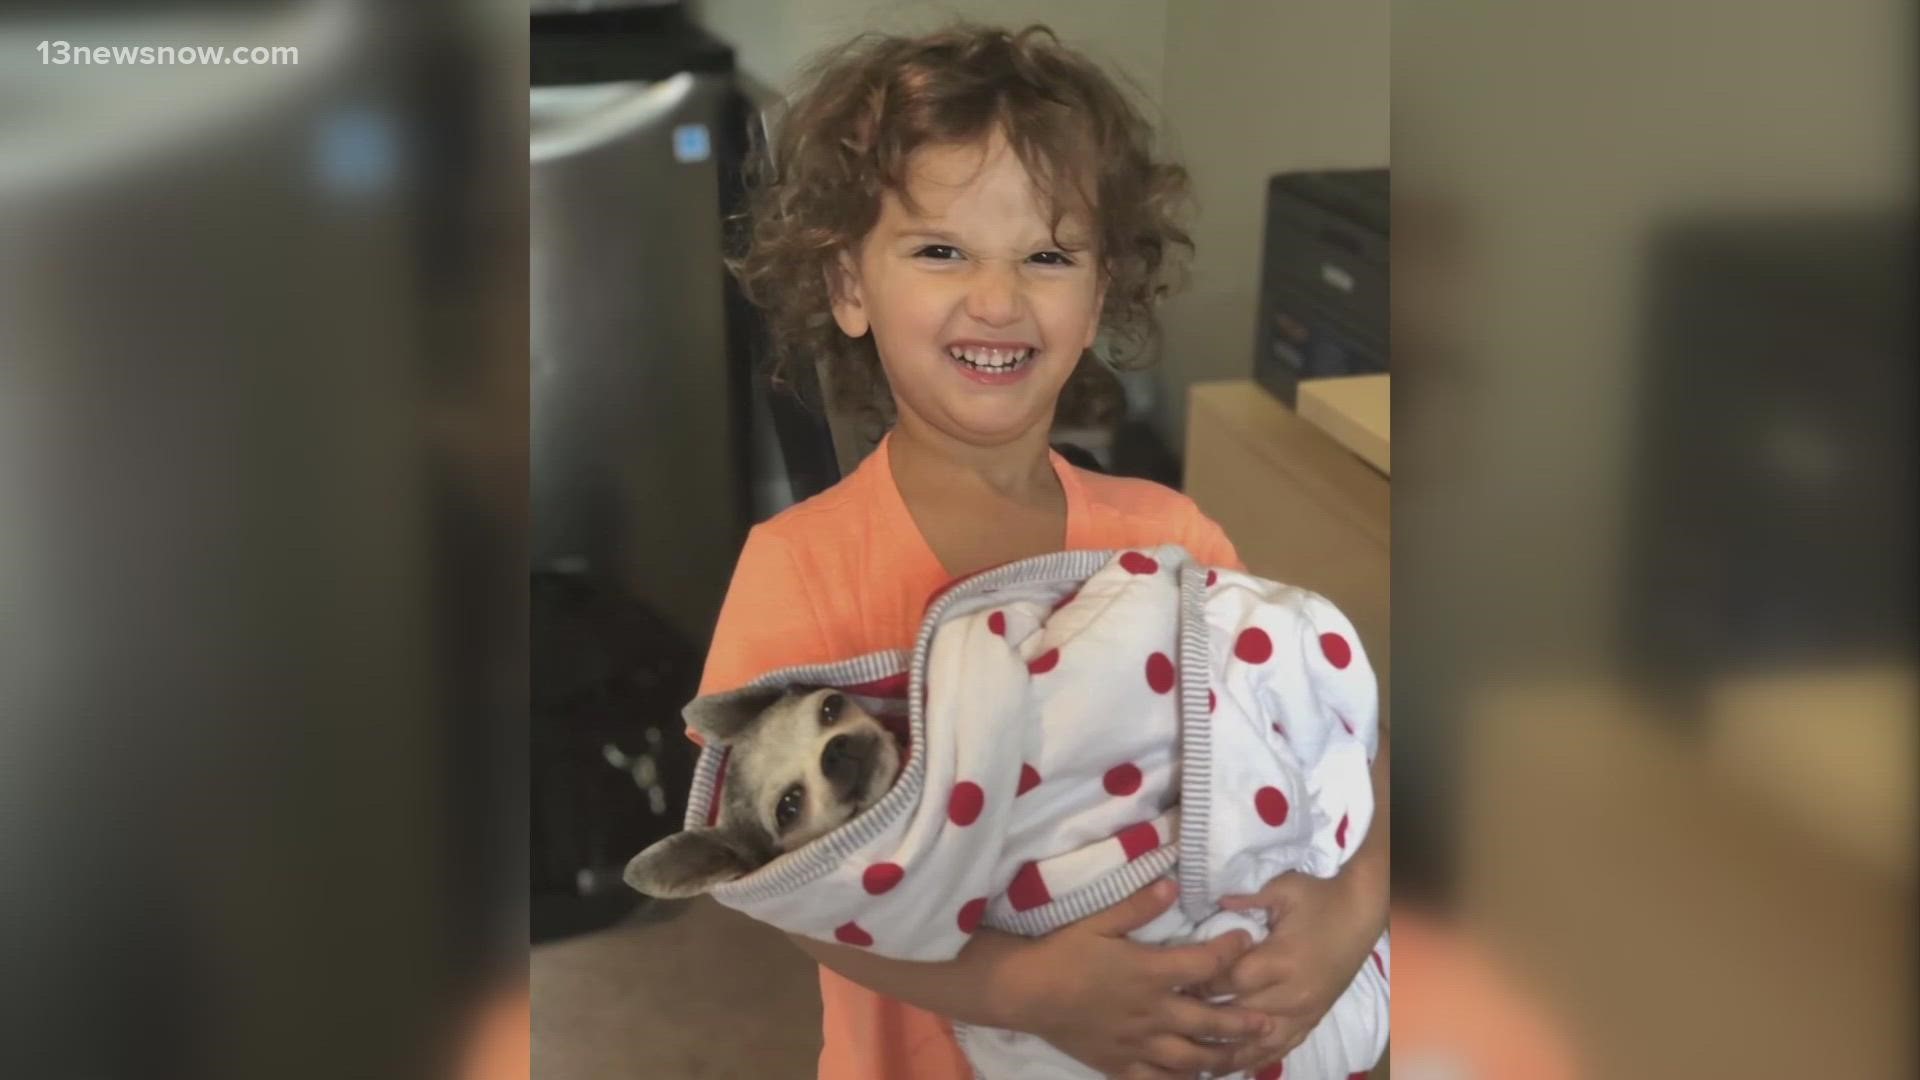 A little girl in Virginia Beach is getting a life-changing surprise. She's one of more than 25 million Americans with a rare disease.